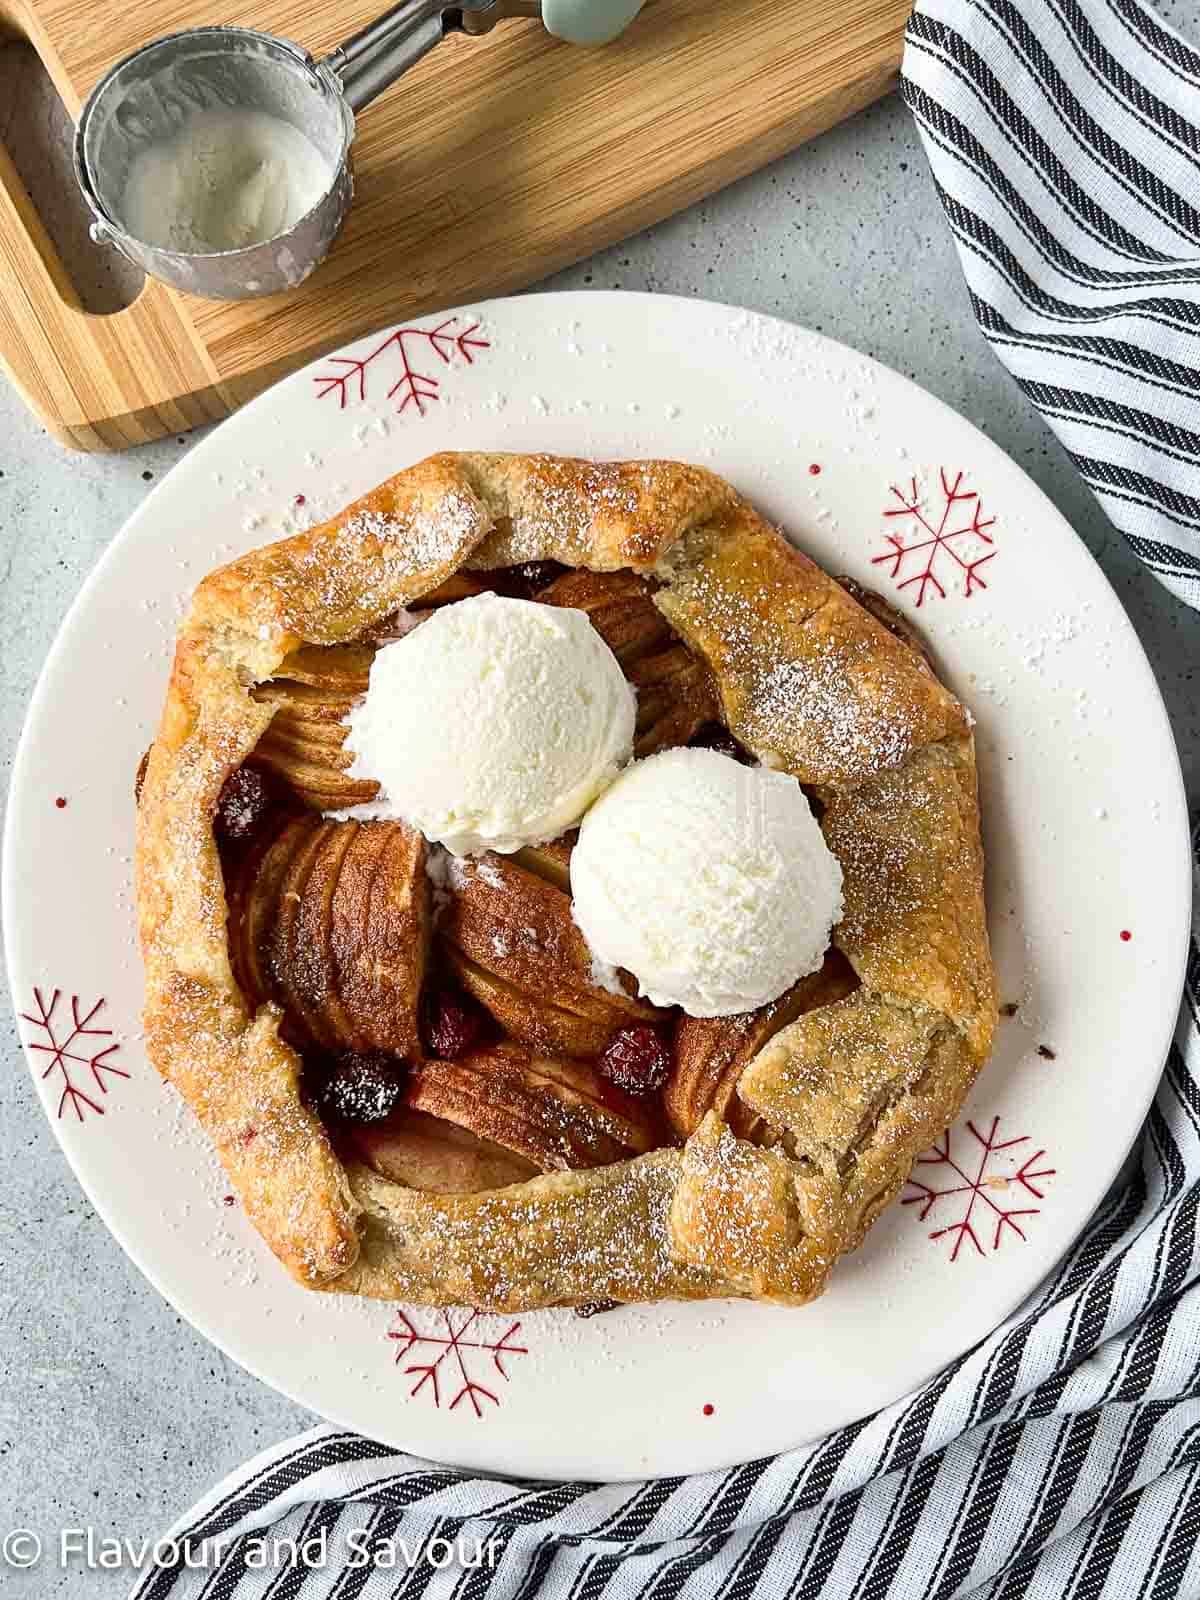 Puff pastry apple cranberry galette with two scoops of ice cream on a serving plate.